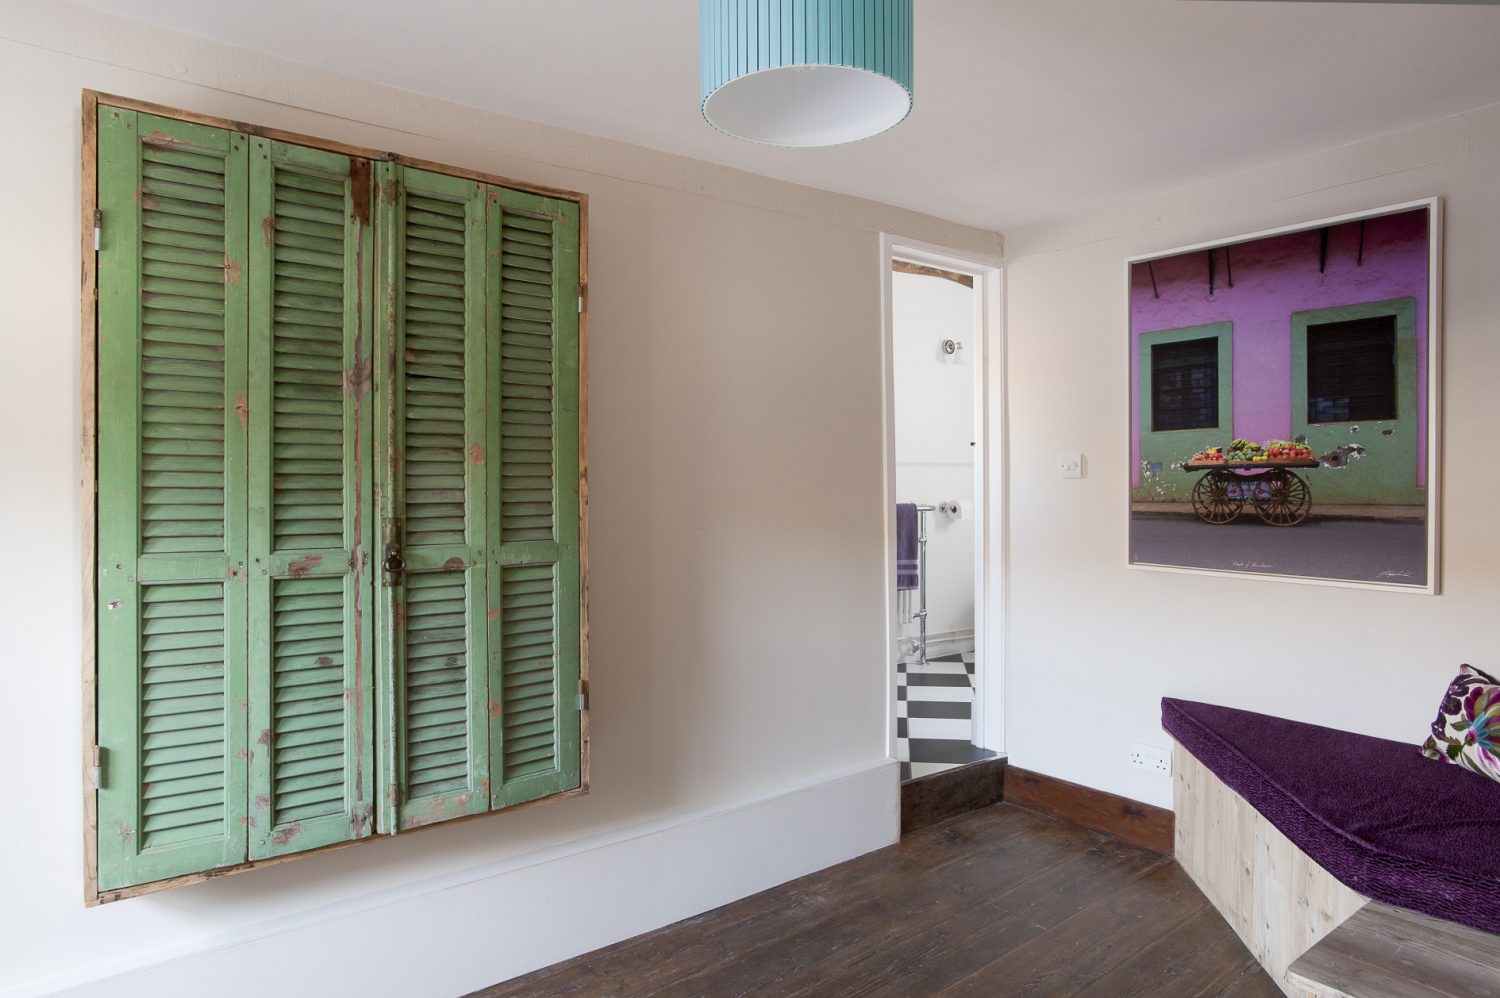 In the study a large photograph printed on canvas echoes the vivid purple and green soft furnishings that Rosemary has used in the room. The bathroom next door features black and white diamond floor tiles, a roll top bath and a Savoy style pedestal basin...